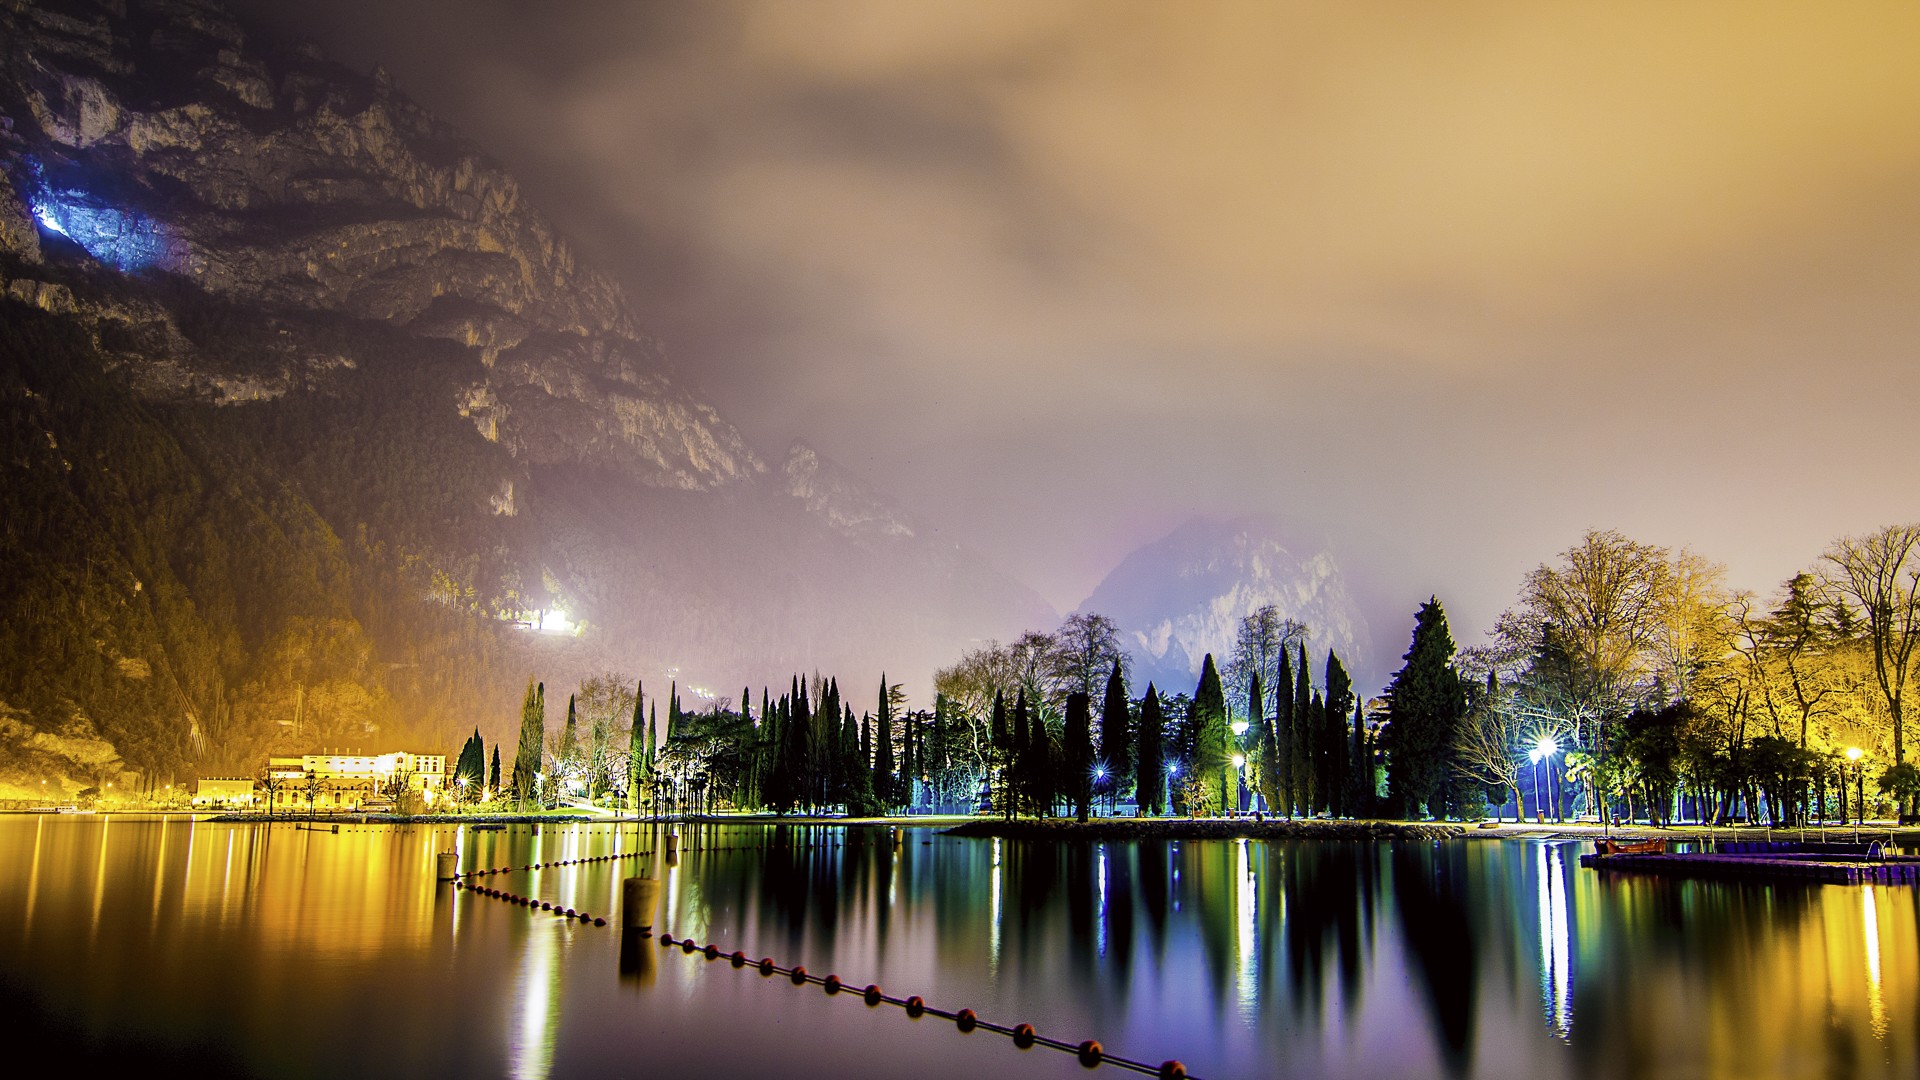 General 1920x1080 landscape nature night lights mountains trees lake